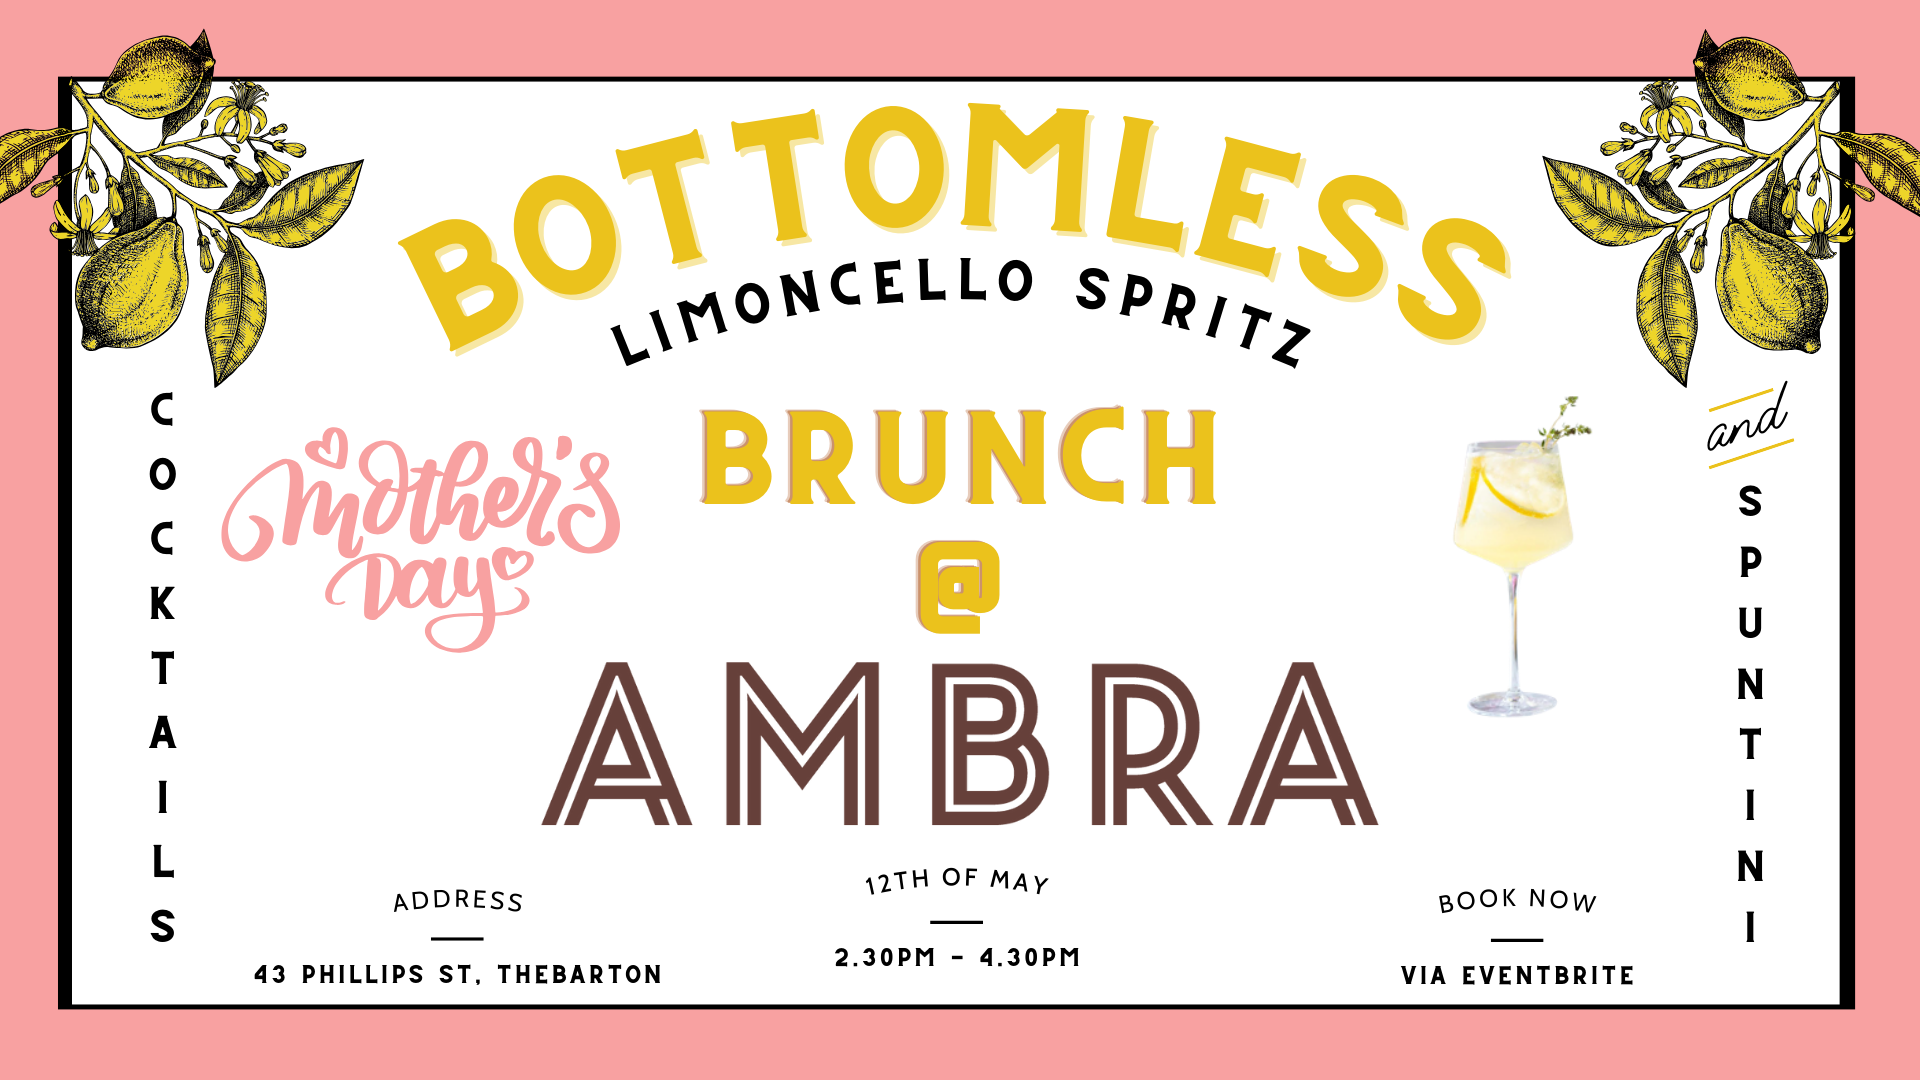 Mothers Day Bottomless Brunch | Ambra Limoncello Spritz